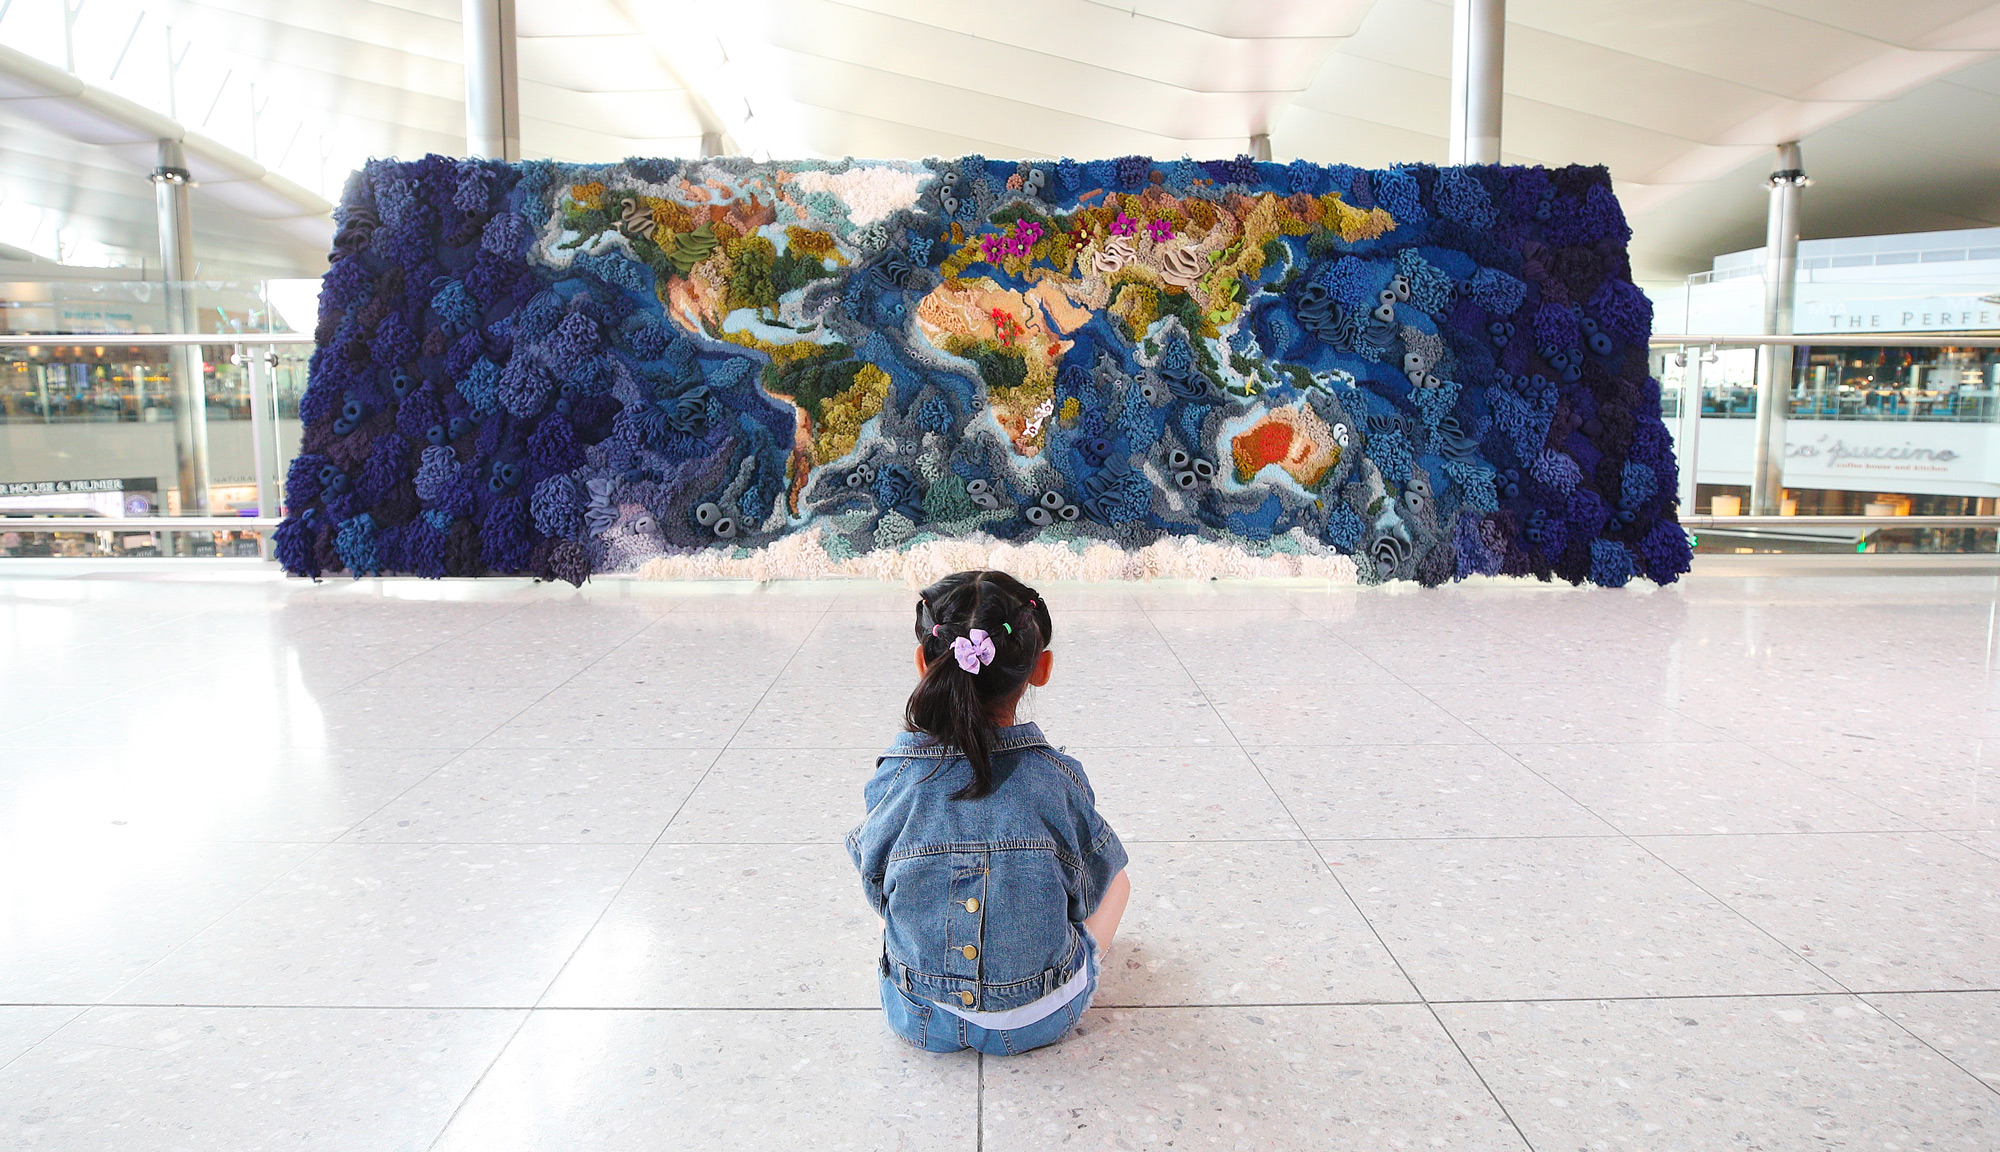 A 20 Foot-Wide Tapestry by Vanessa Barragão Recreates the World in Textural Yarn